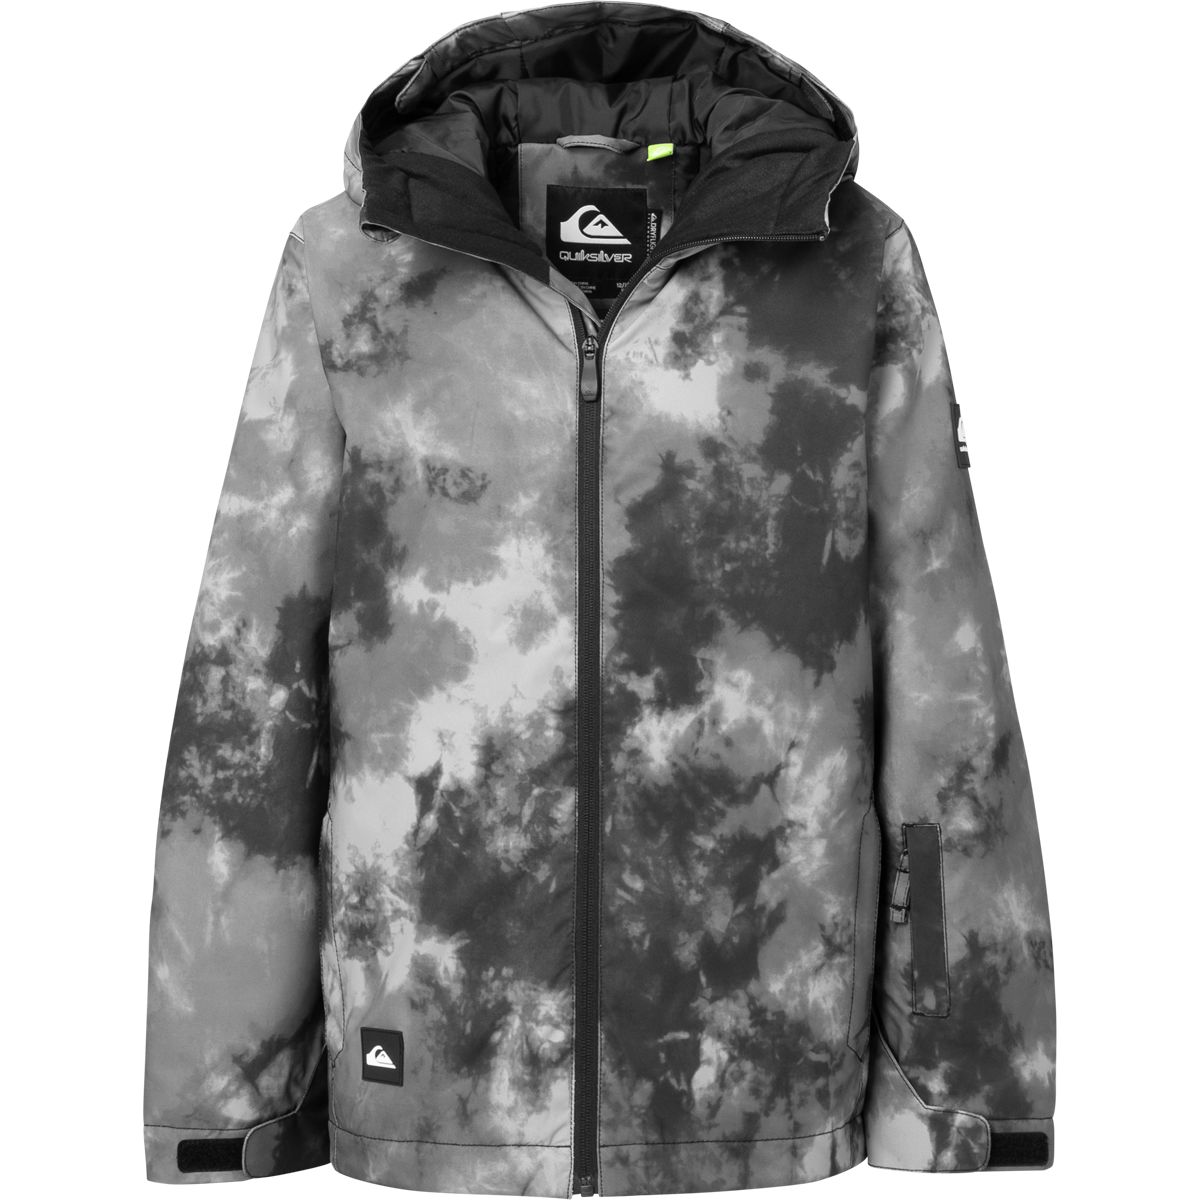 Quiksilver Boys' Mission Printed Insulated Jacket